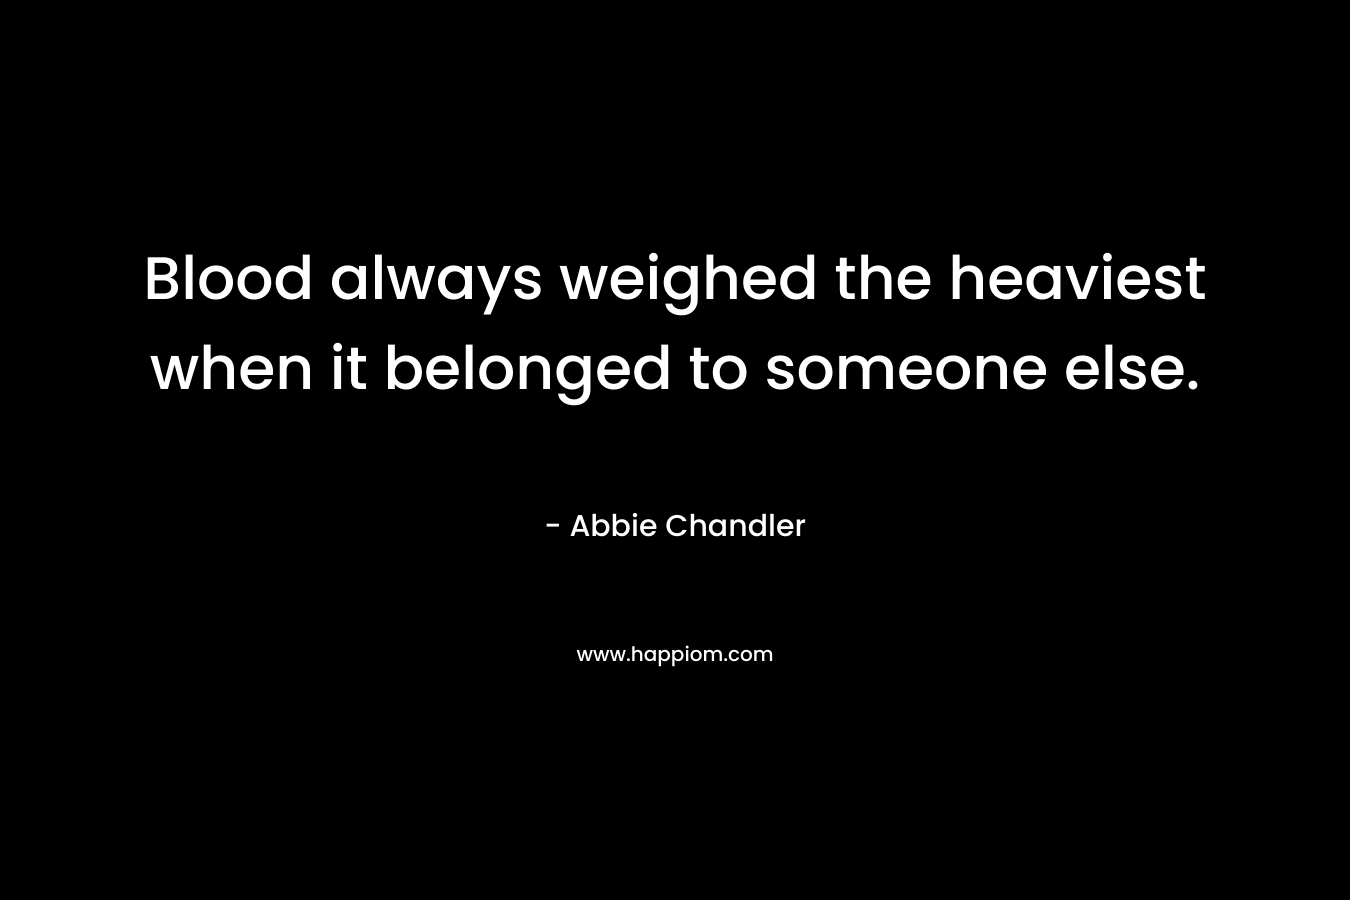 Blood always weighed the heaviest when it belonged to someone else. – Abbie Chandler